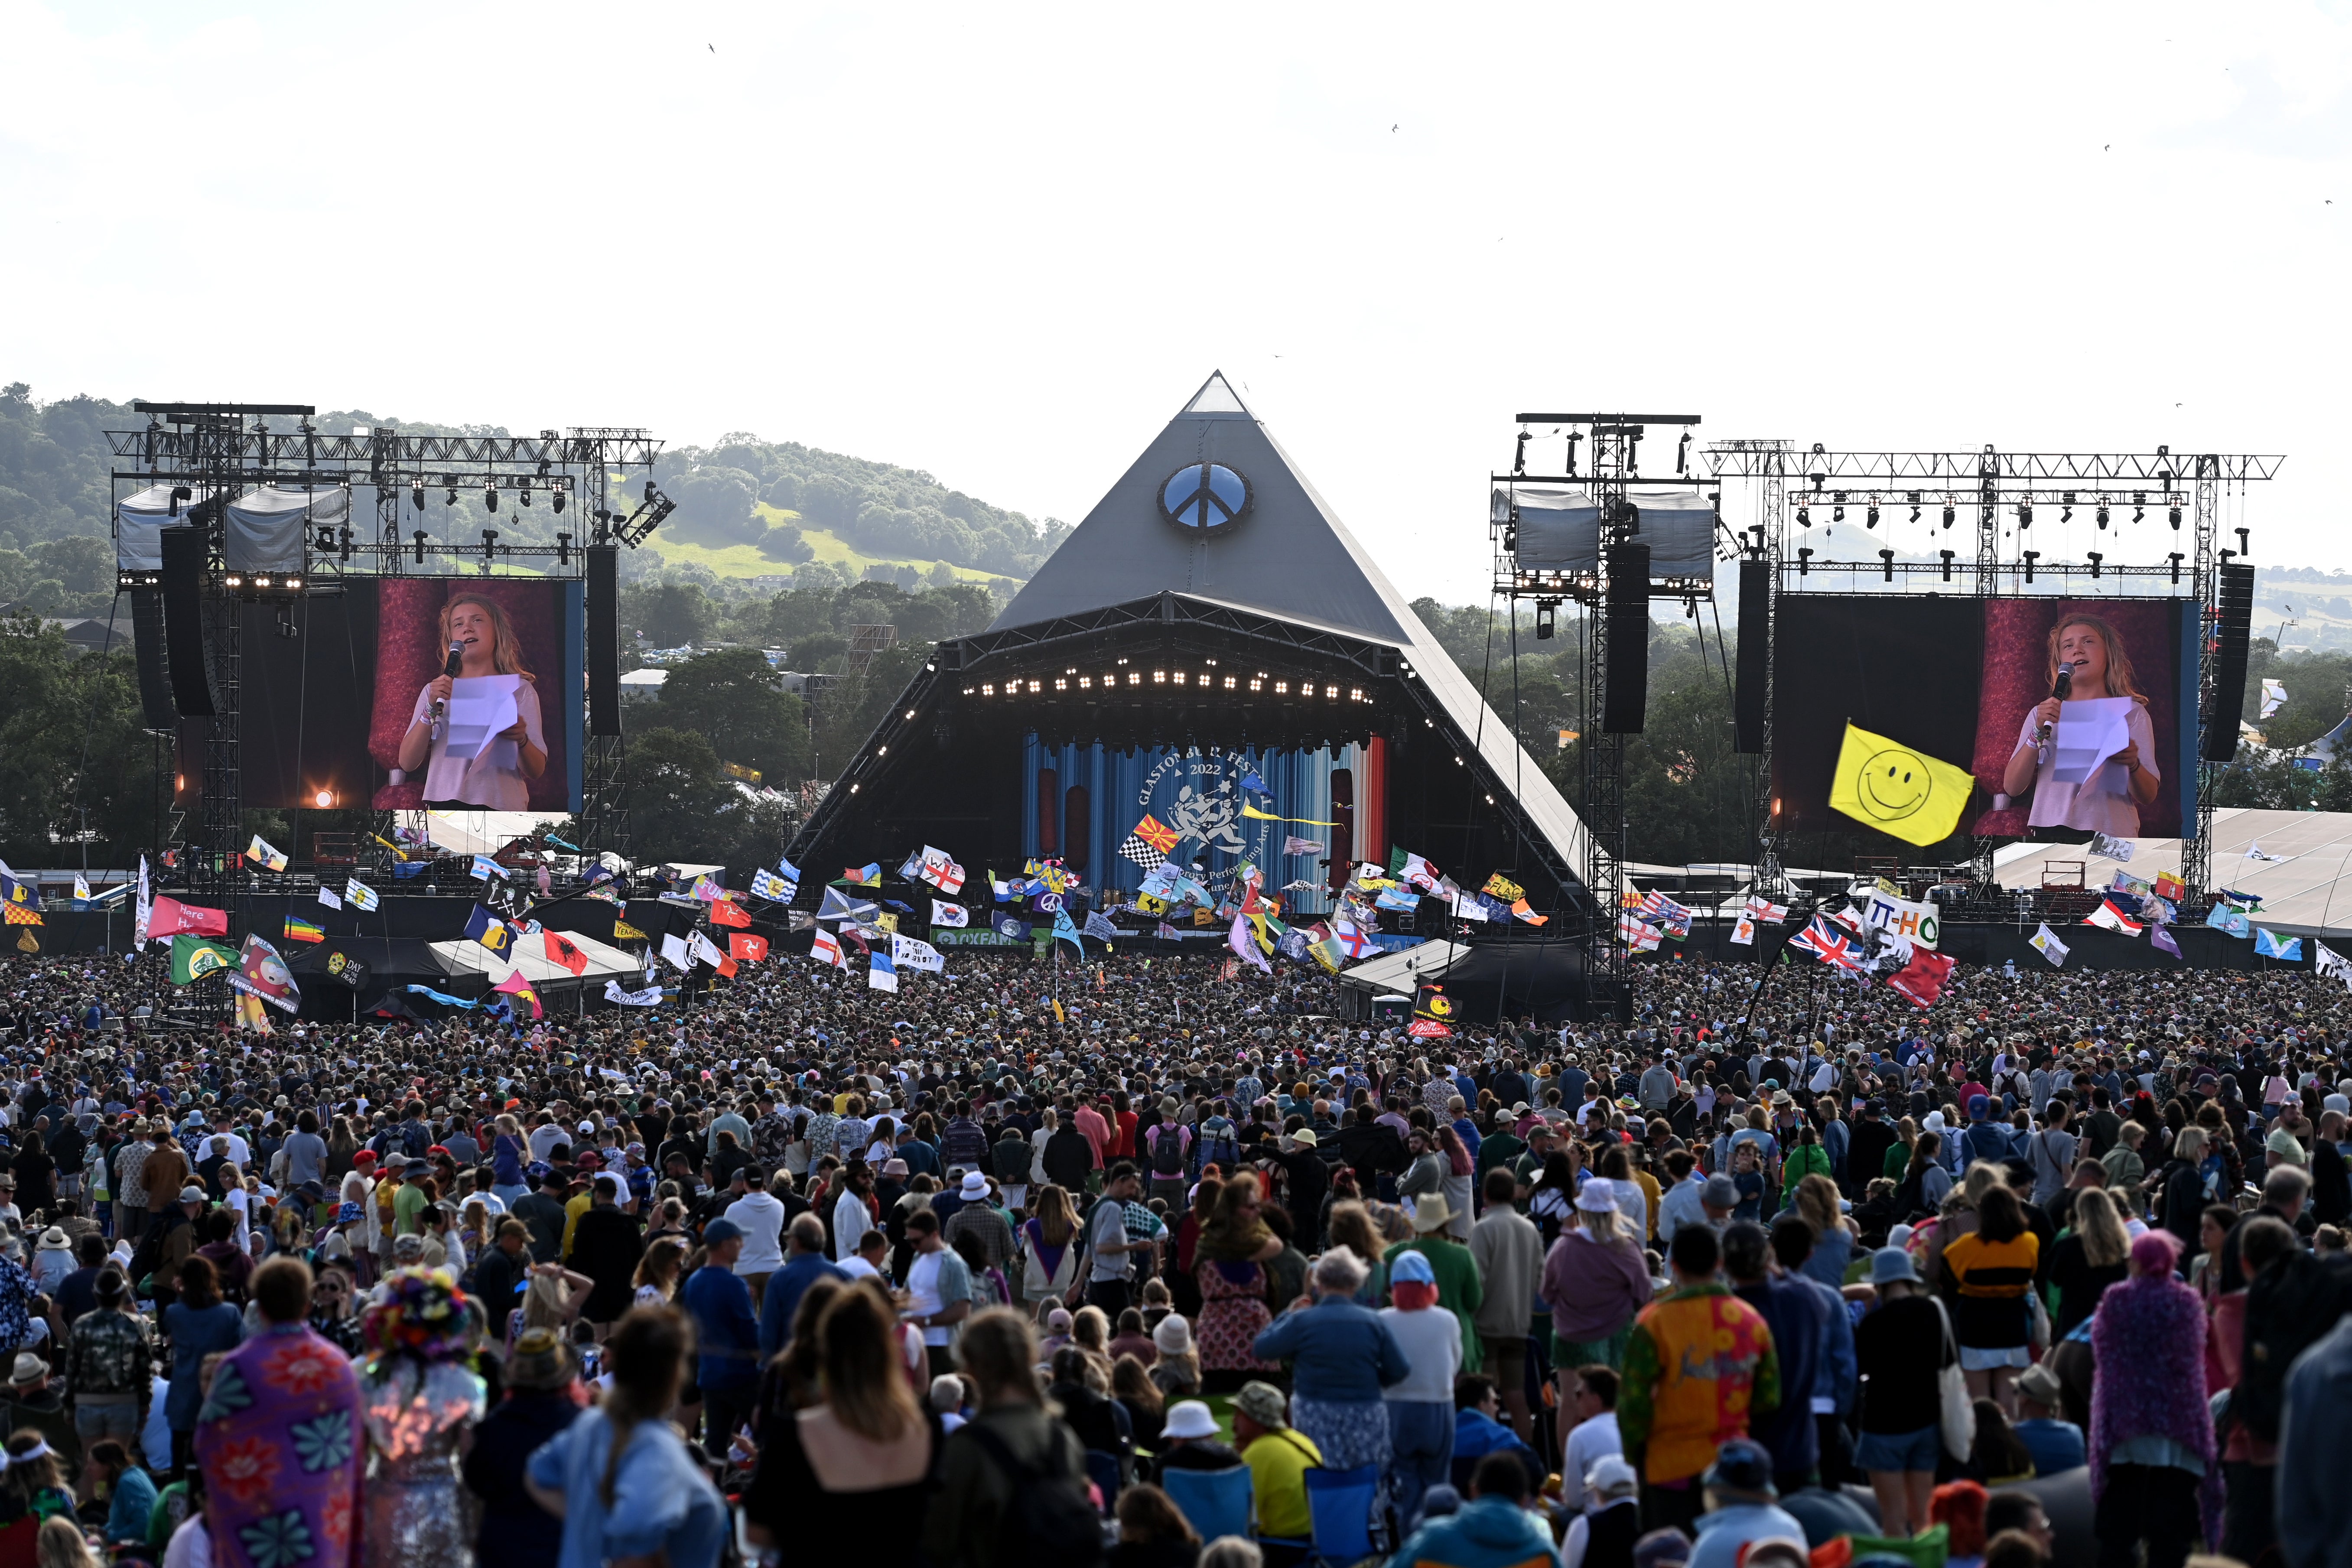 Glastonbury has defined what is so special about live performance